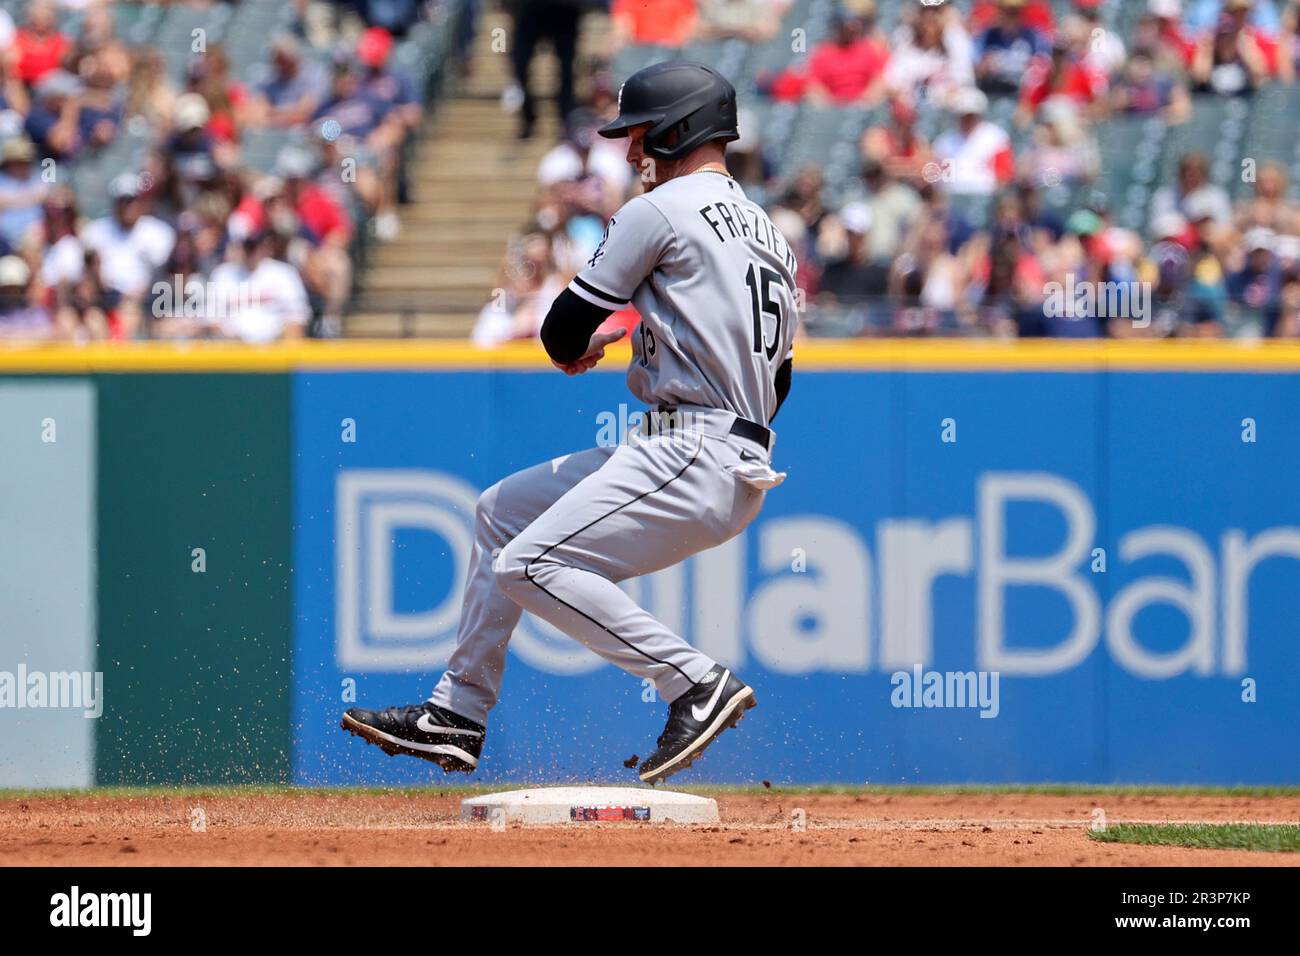 CLEVELAND, OH - MAY 24: Chicago White Sox center fielder Clint